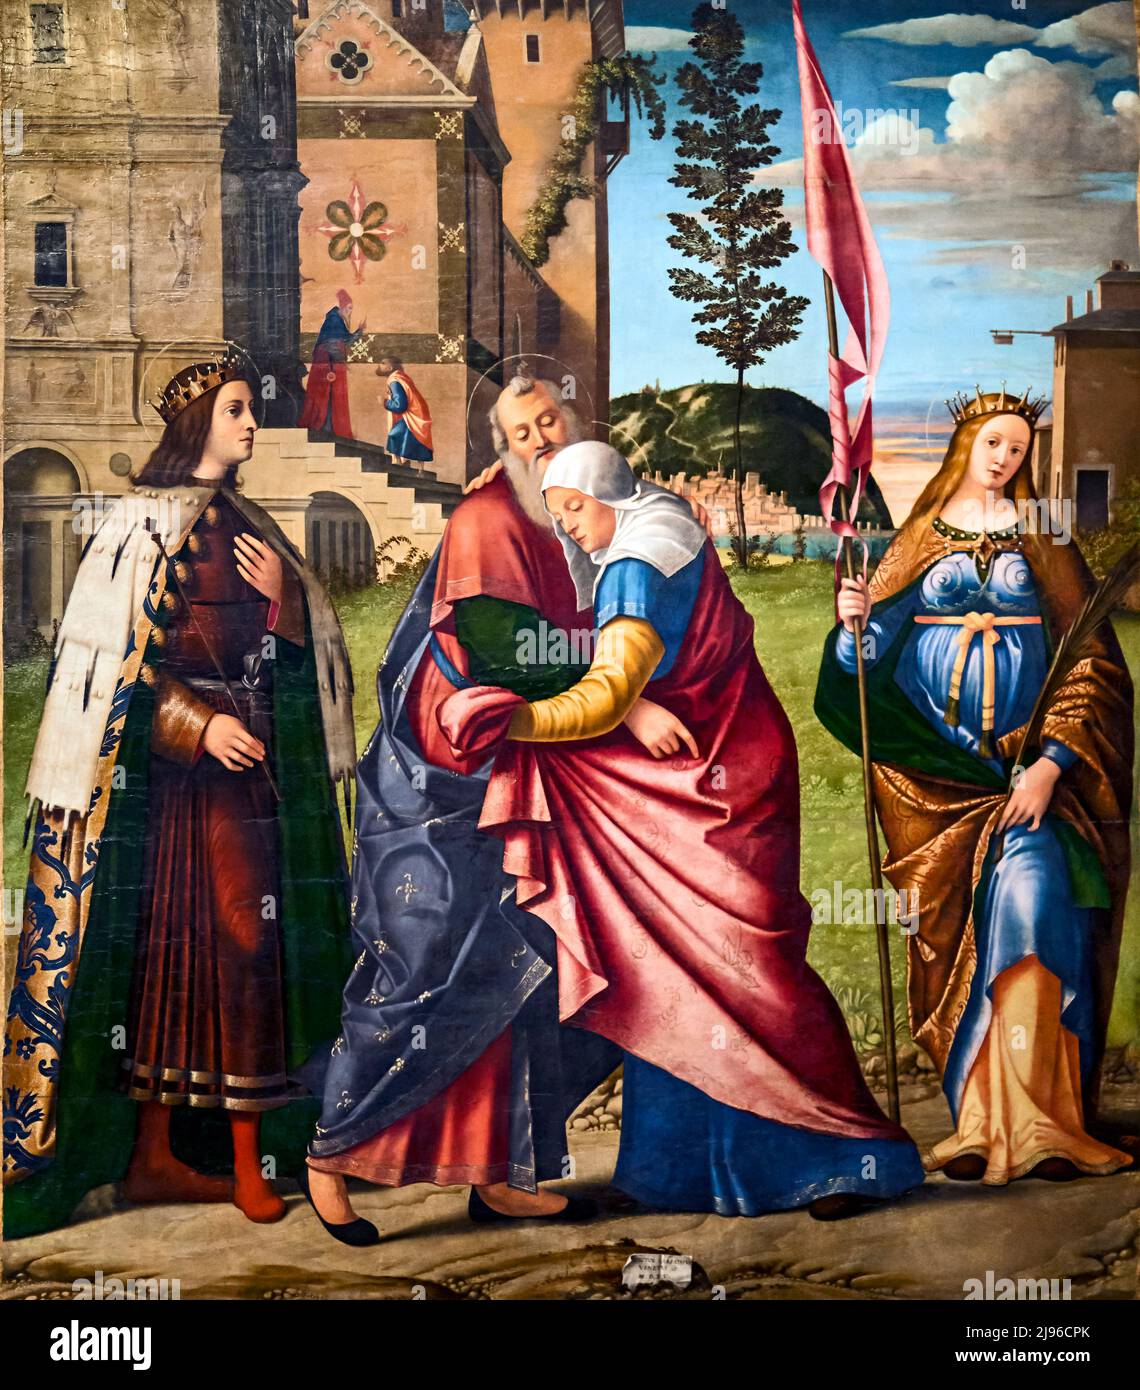 The Meeting of Joachim and Anne outside the Golden Gate of Jerusalem Stock Photo